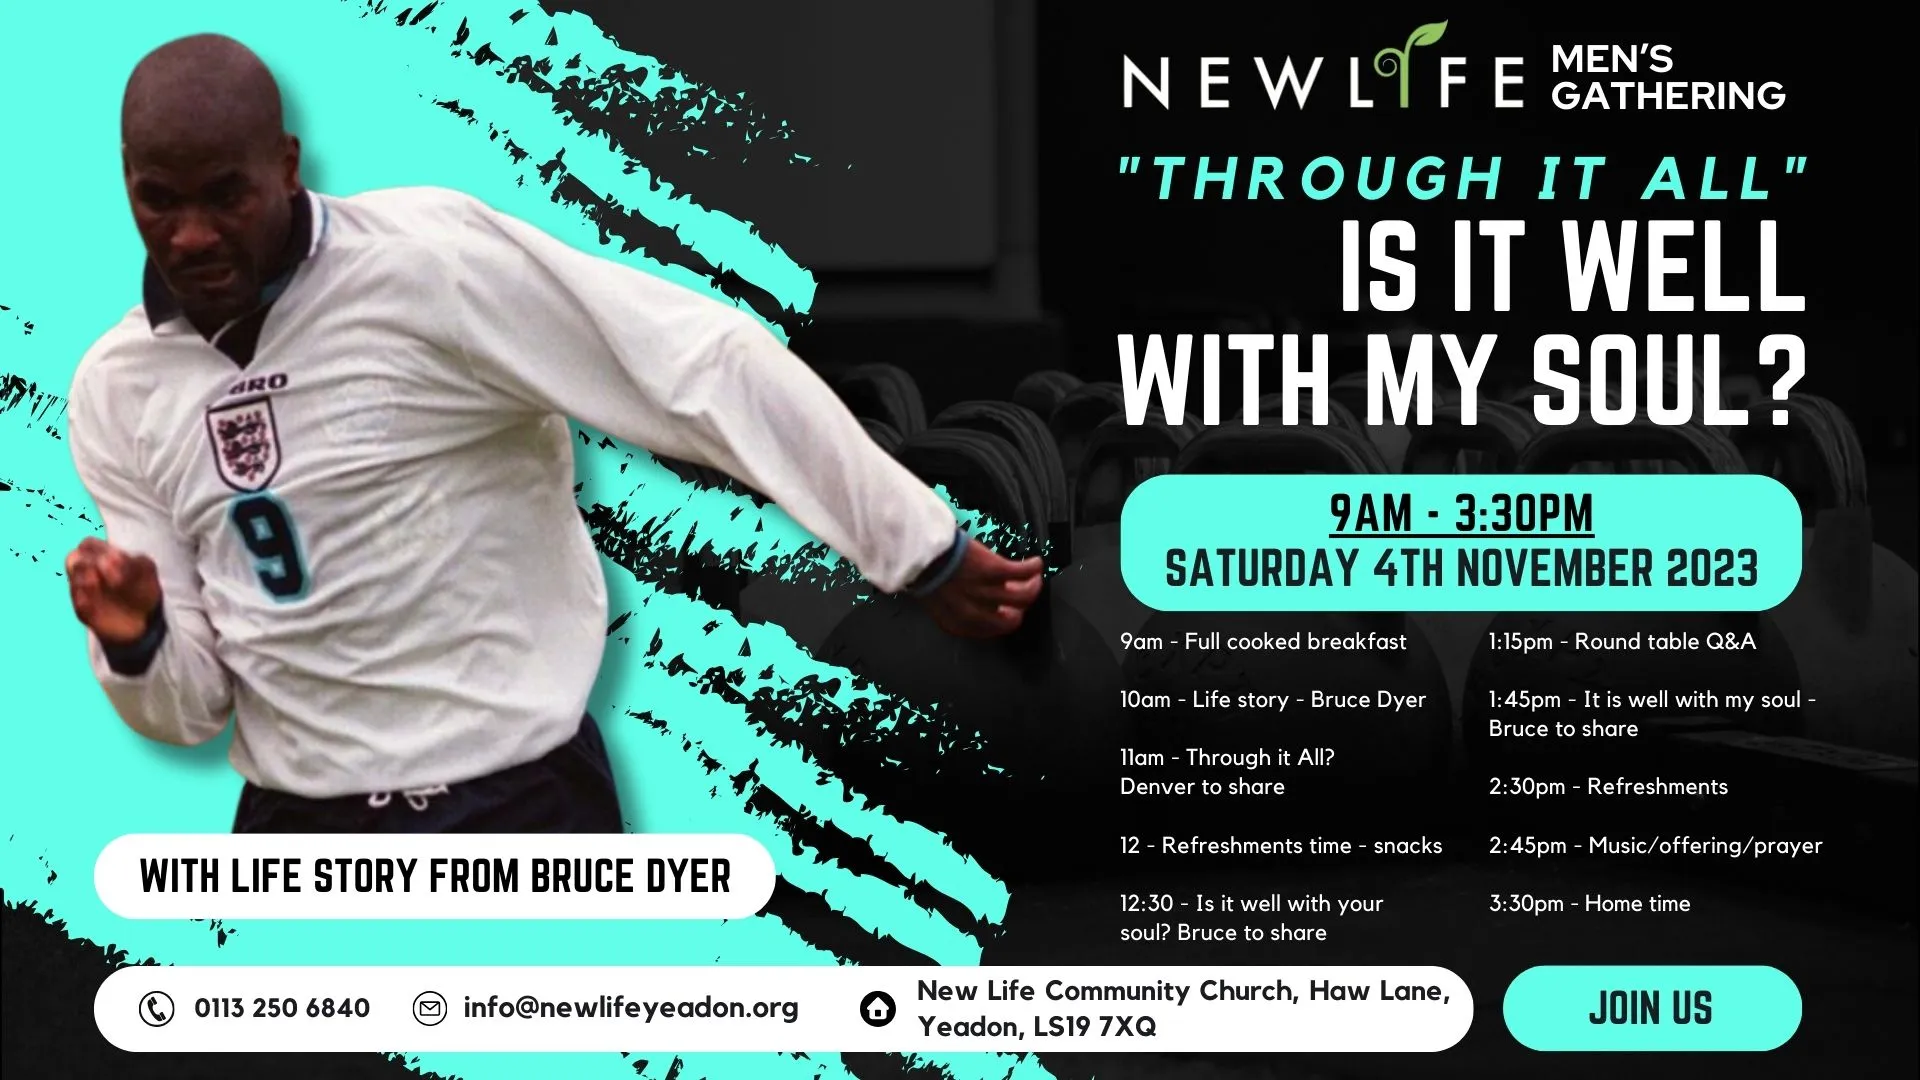 Men's Gathering: "Through it all" Is it well with my soul? 9am - 3:30pm Saturday 4th November 2023